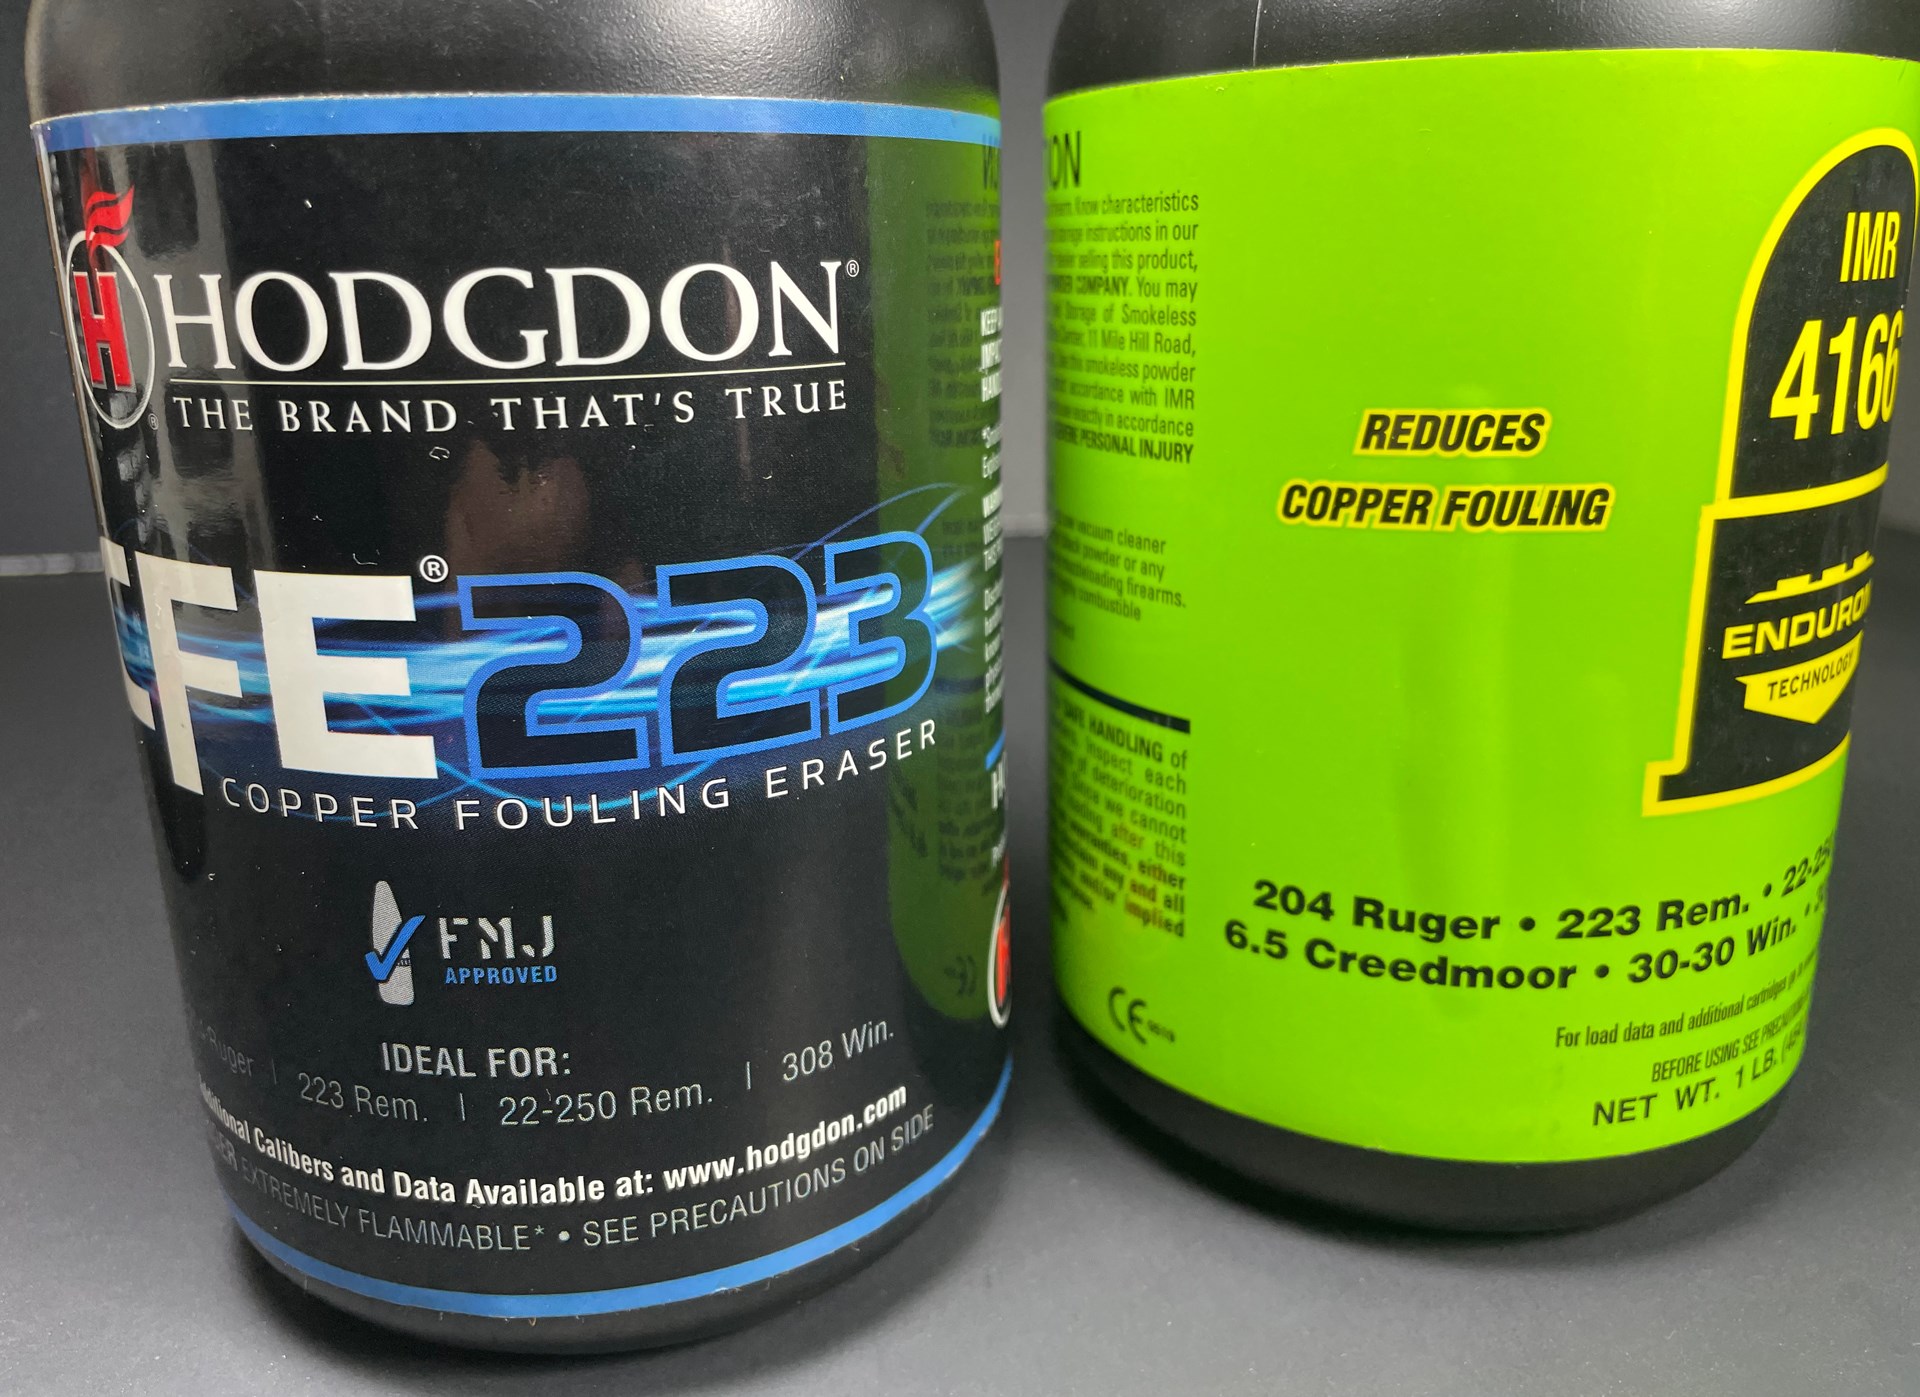 New propellants, such as Hodgdon CFE 223 and IMR 4166, often have additives to reduce/remove copper fouling through shooting. If you’re a high-volume shooter, you should look for such propellants among those suitable for your cartridge/bullet recipes.